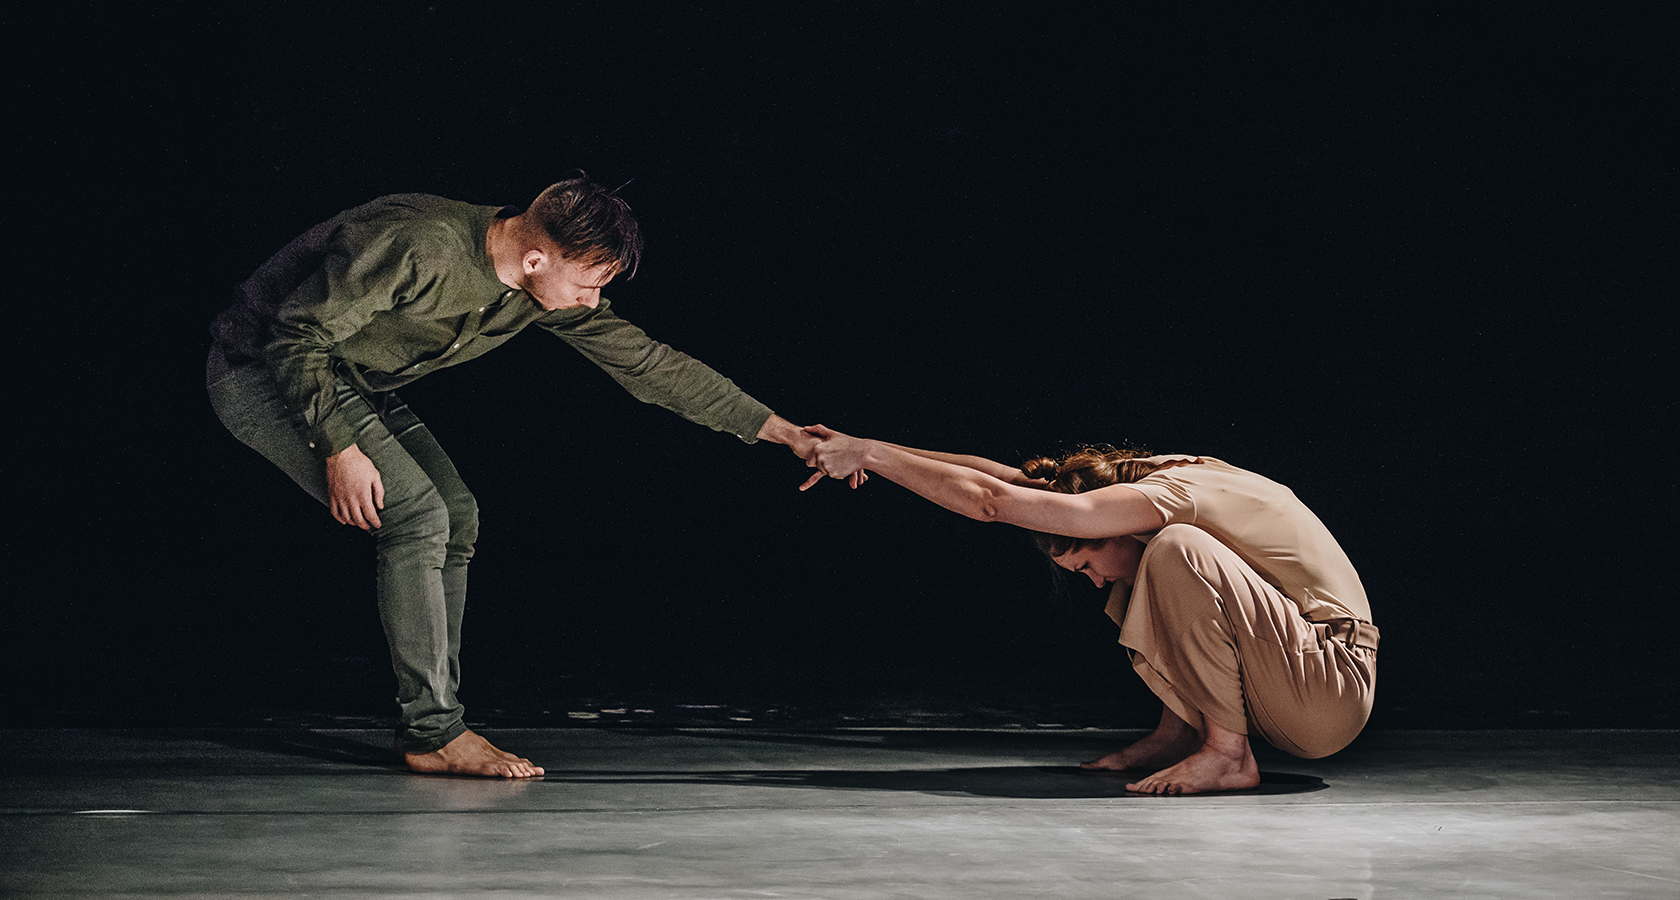 40, 2018. Dance performance by Aleksei Narutto and Olga Timoshenko. Described as a dance myth by the creators, this is a study of life, death, and the transition between those, through the explorations of religious and cultural symbolism of the number 40